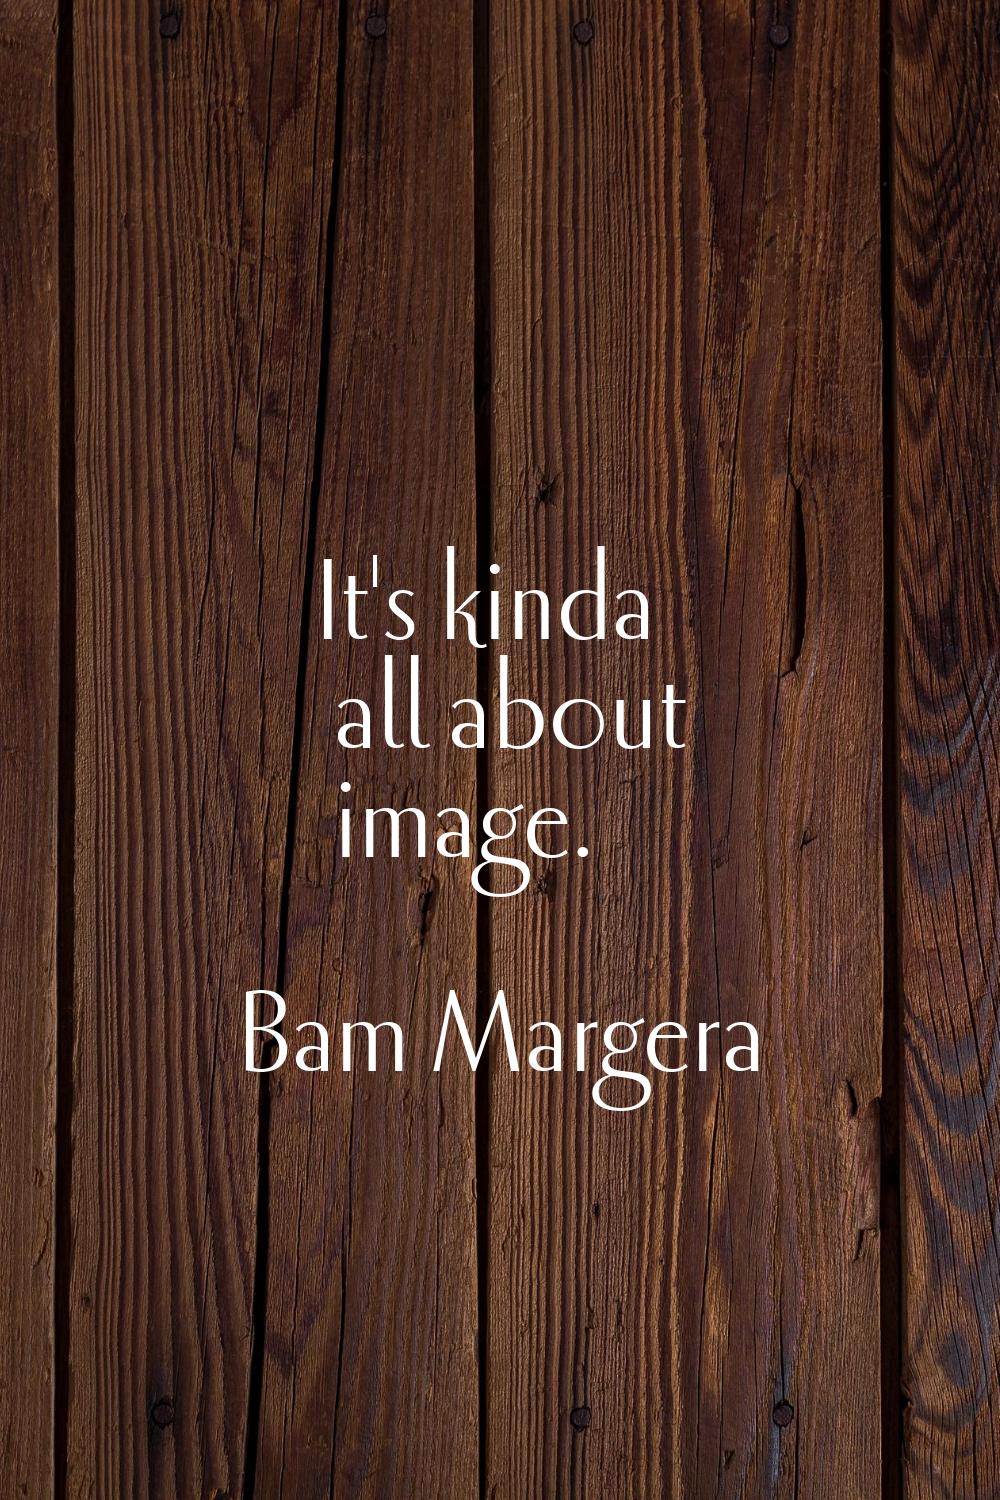 It's kinda all about image.